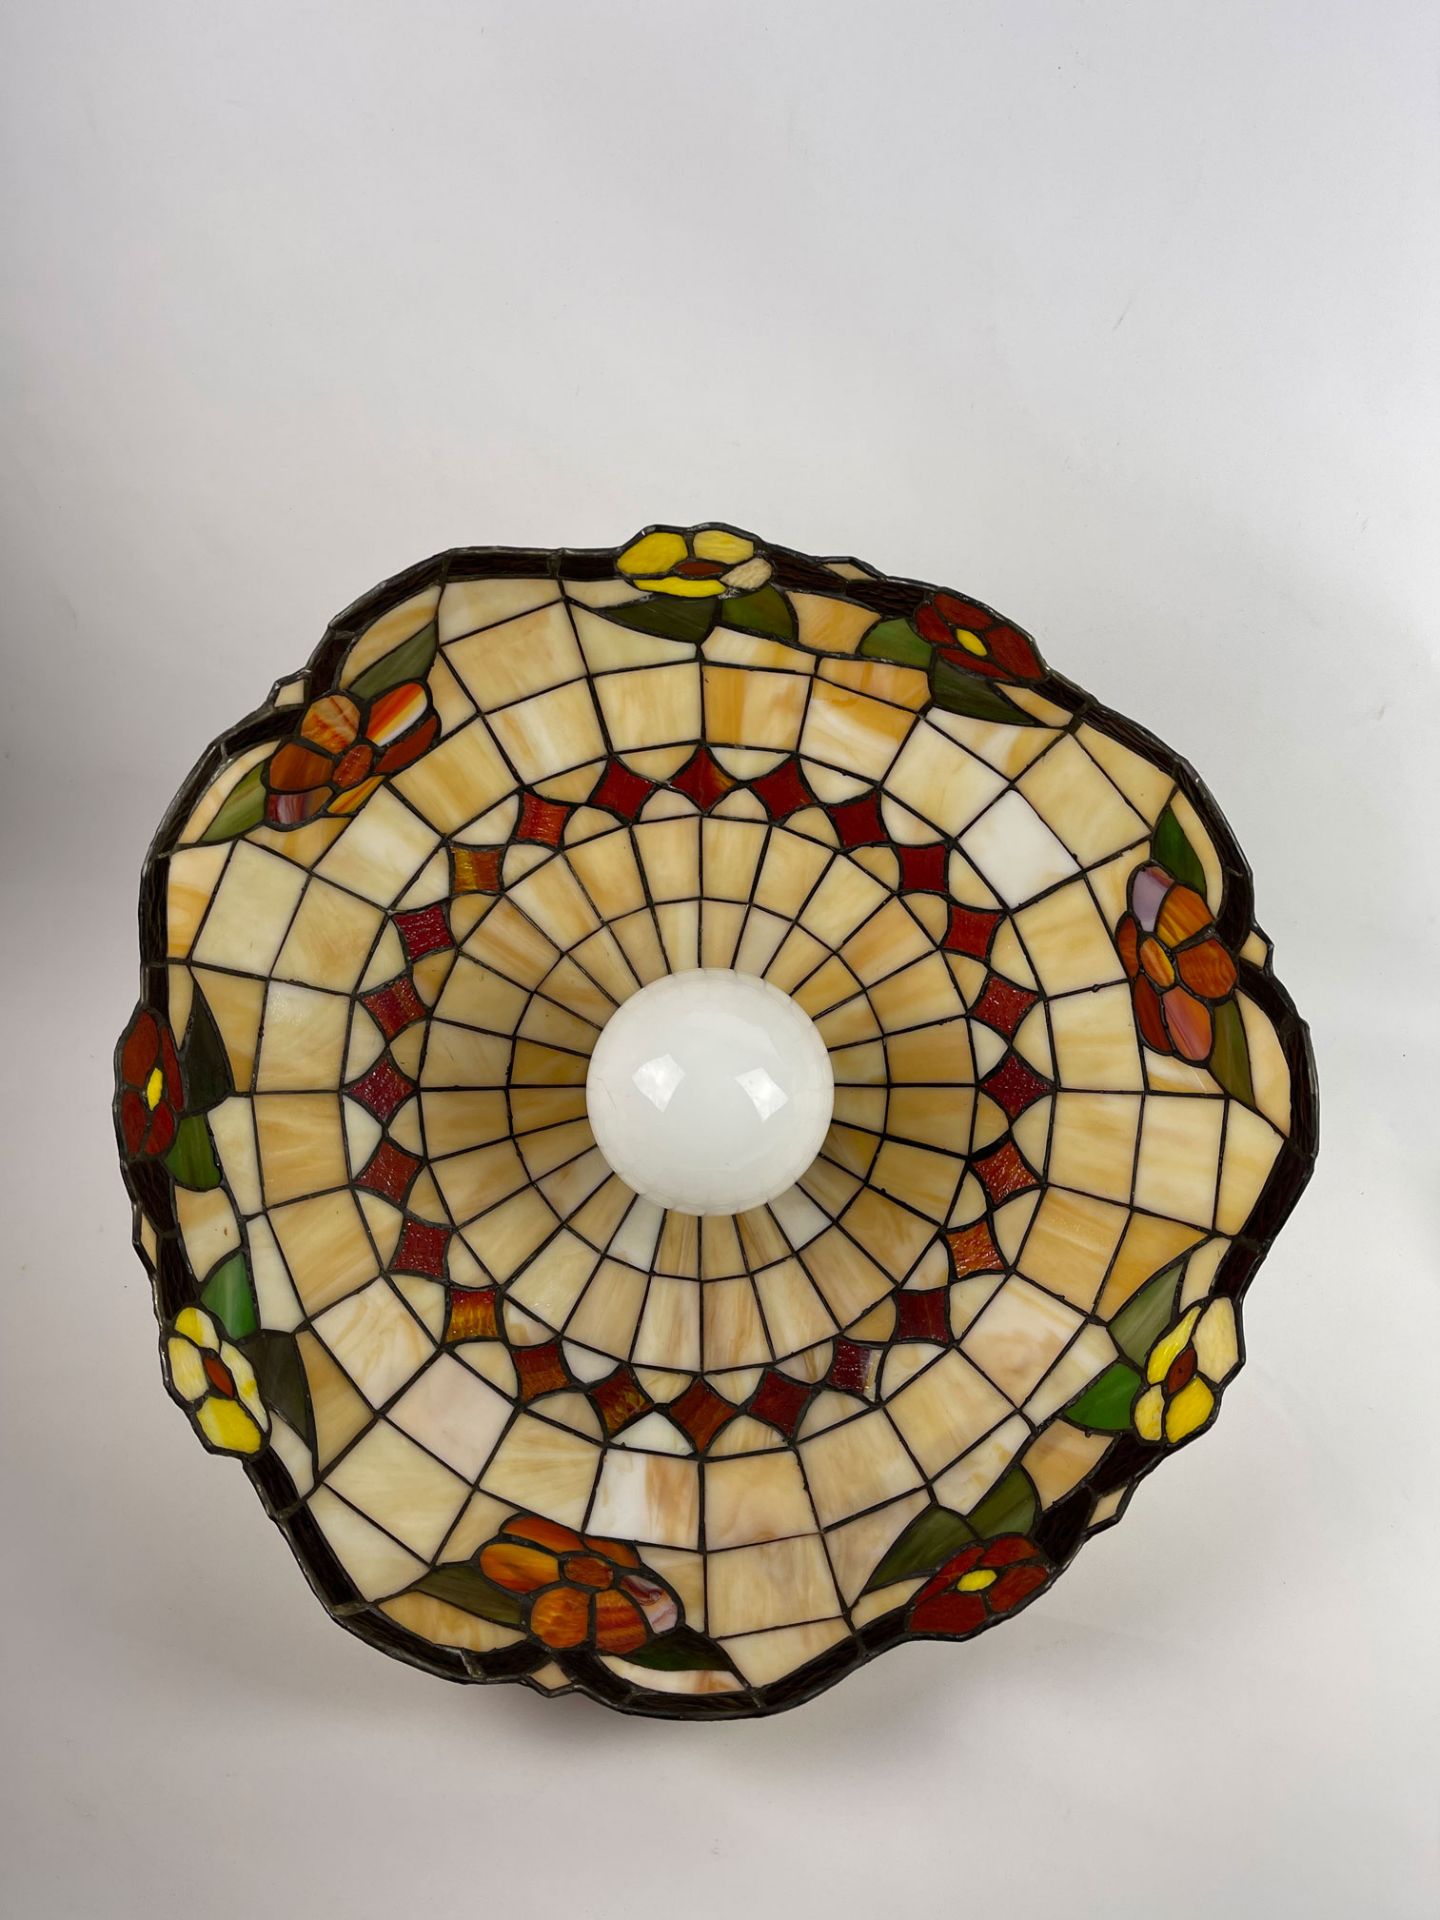 Tiffany Style Hanging Ceiling Lamp with Flower Motif - Image 2 of 2